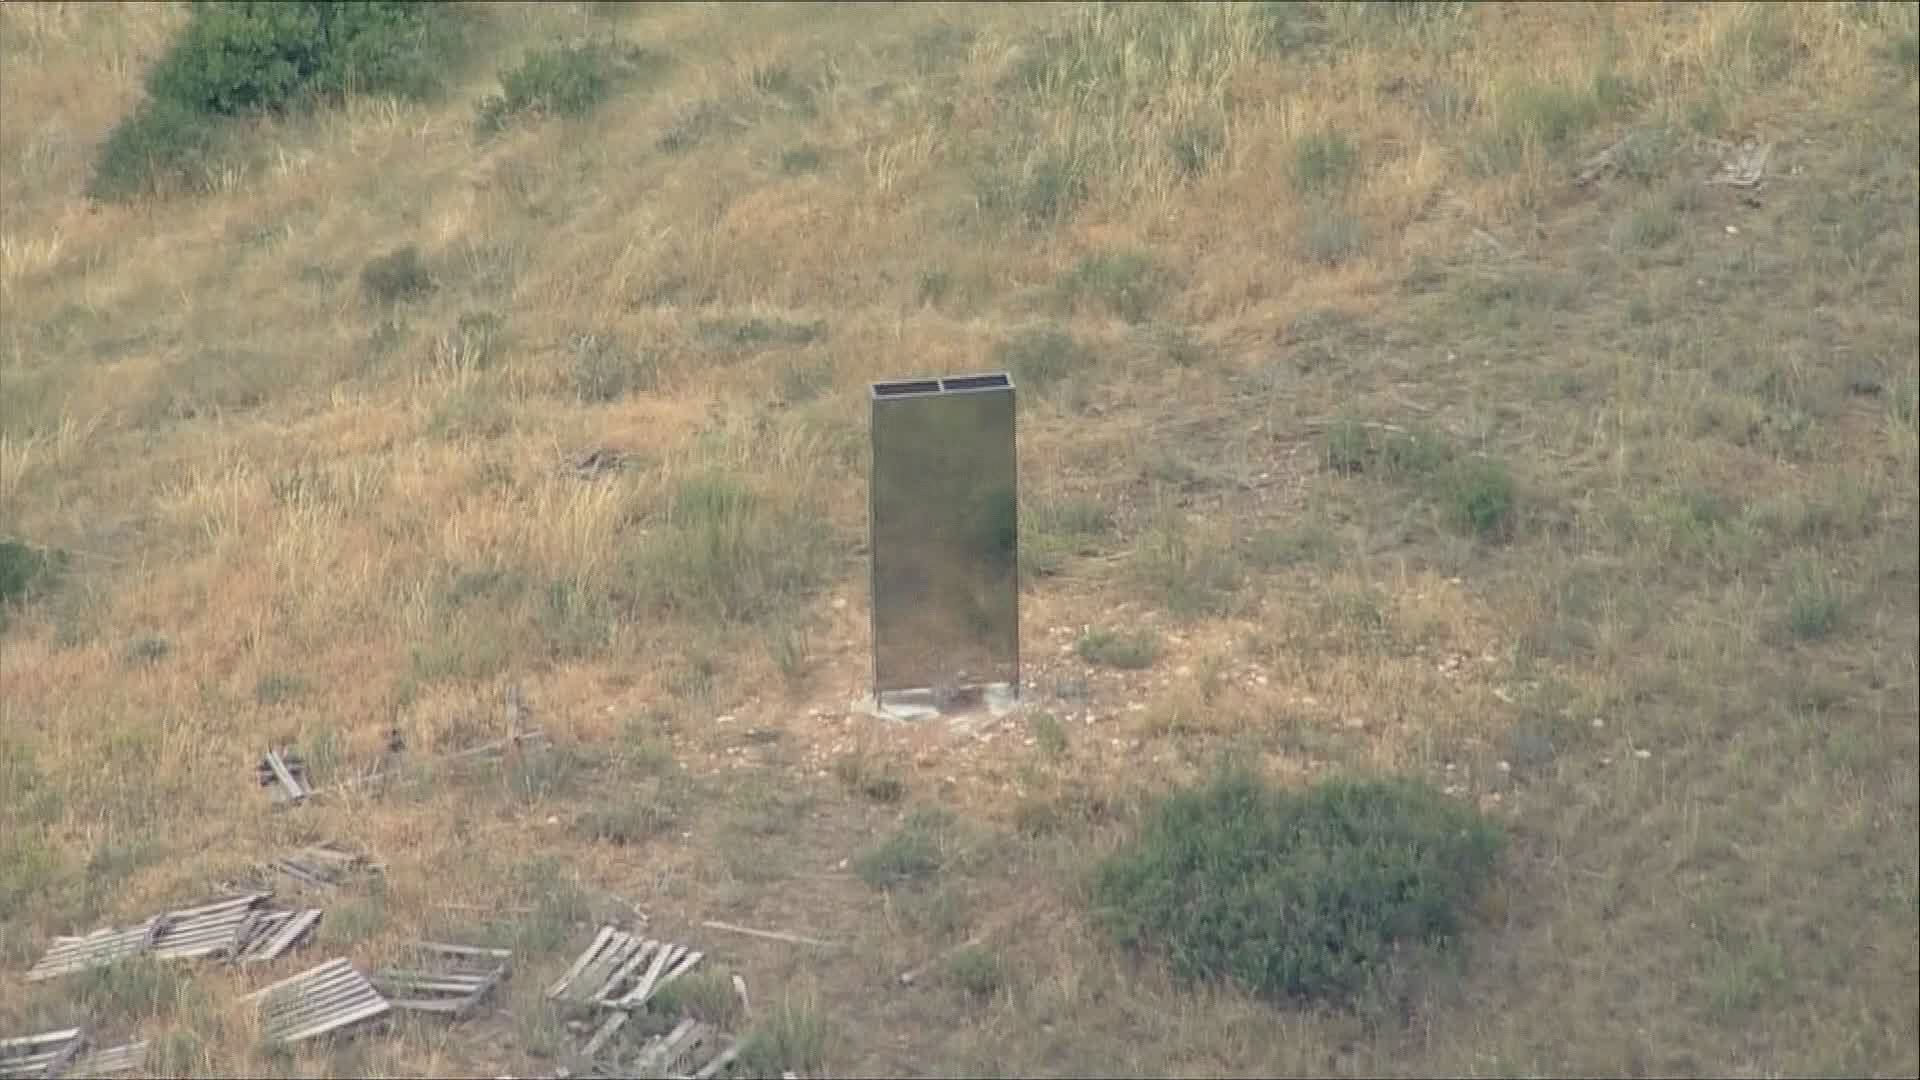 The shiny, tall, rectangular object appeared in a field about 70 miles north of Denver in Larimer County on Wednesday.